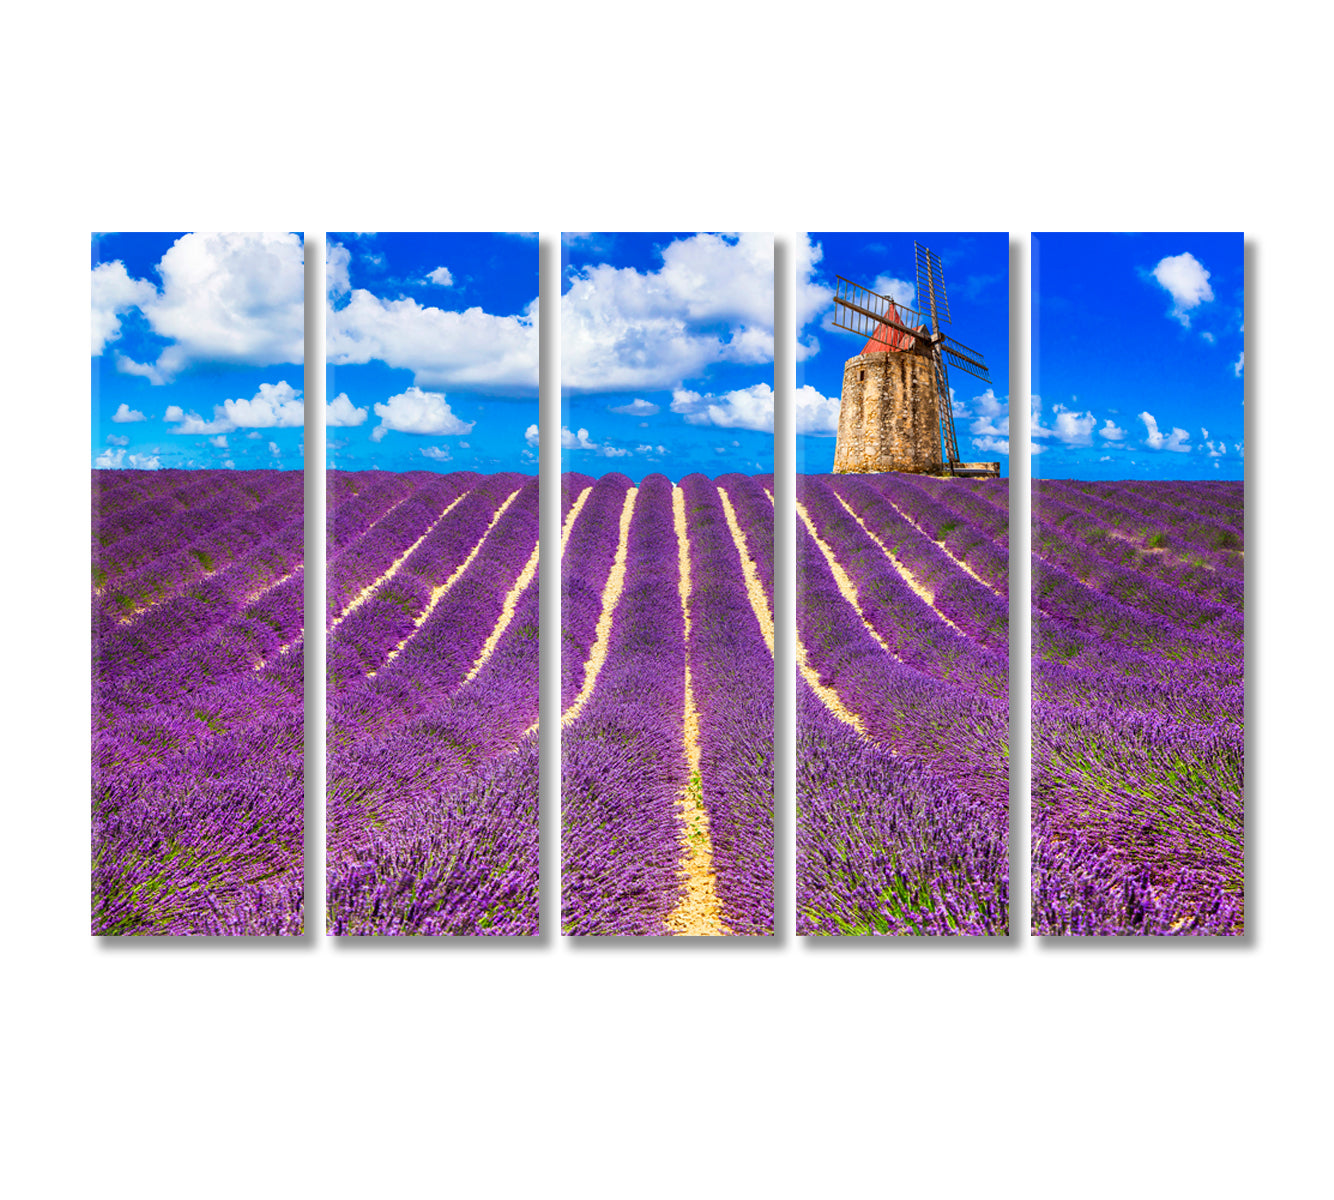 Blooming Lavender Fields Provence France Canvas Print-CetArt-5 Panels-36x24 inches-CetArt